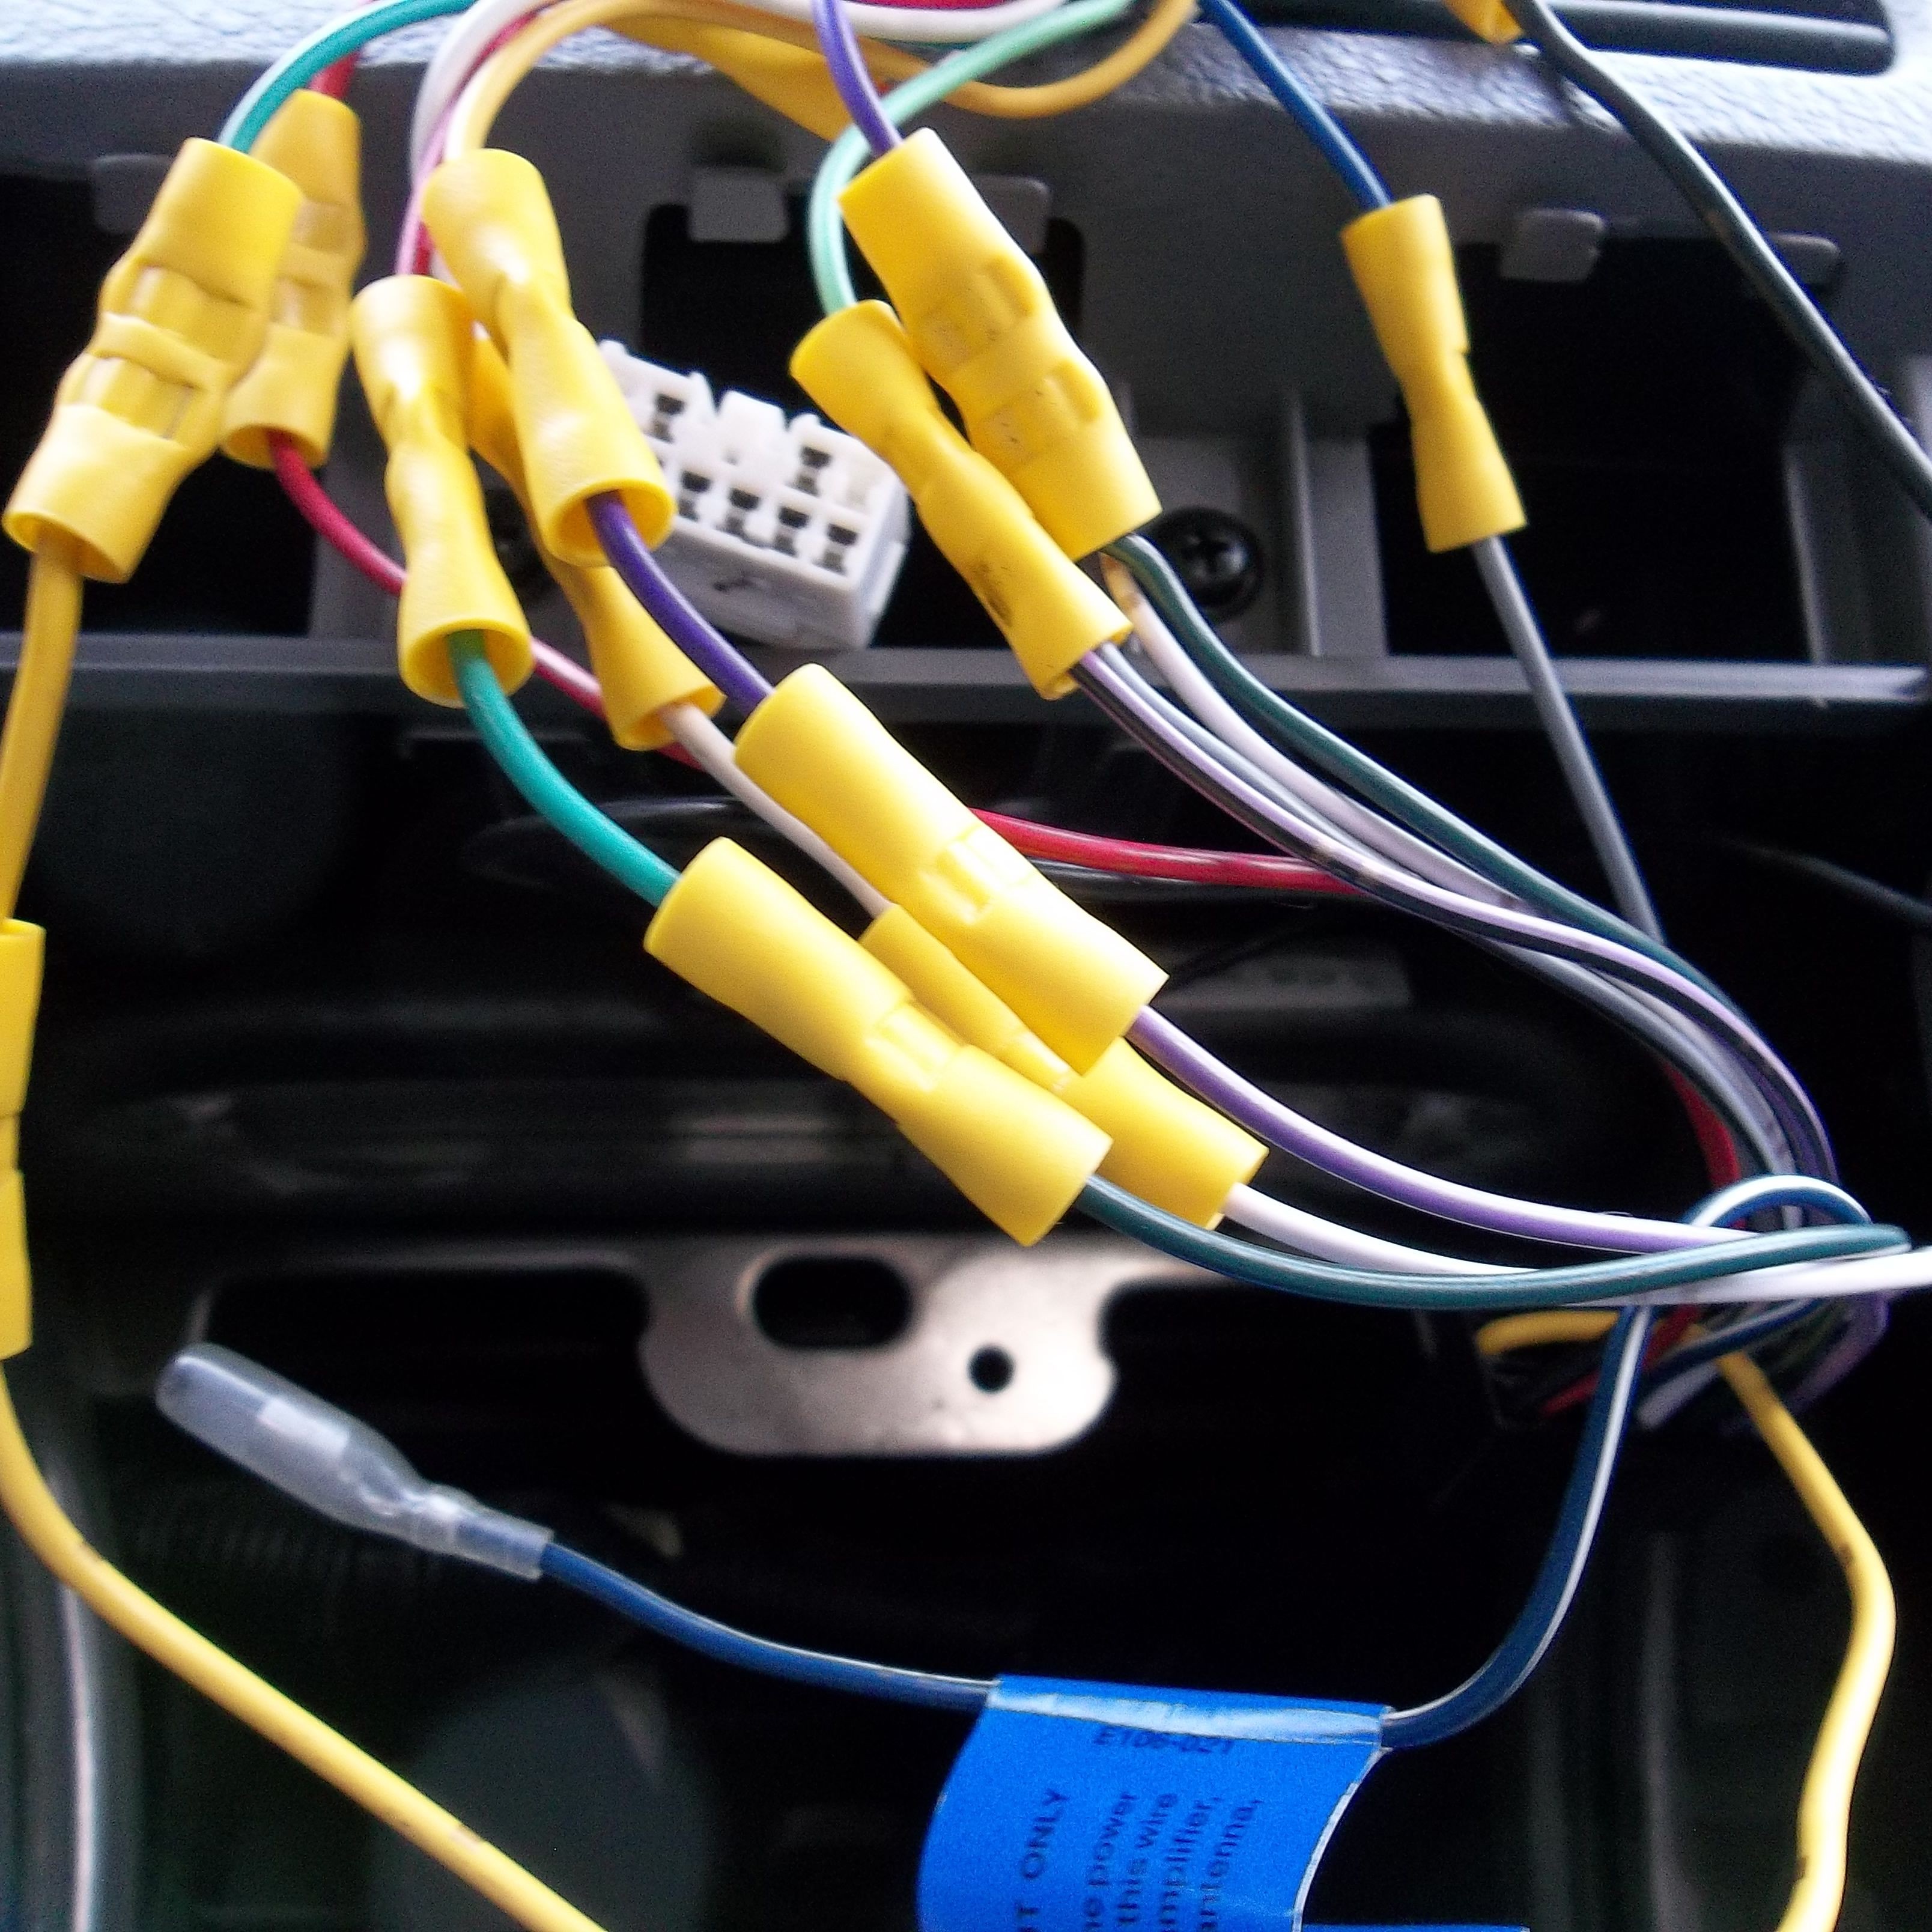 Car Amp Wiring Diagram What You Need to Know About Car Amp Wiring Of Car Amp Wiring Diagram